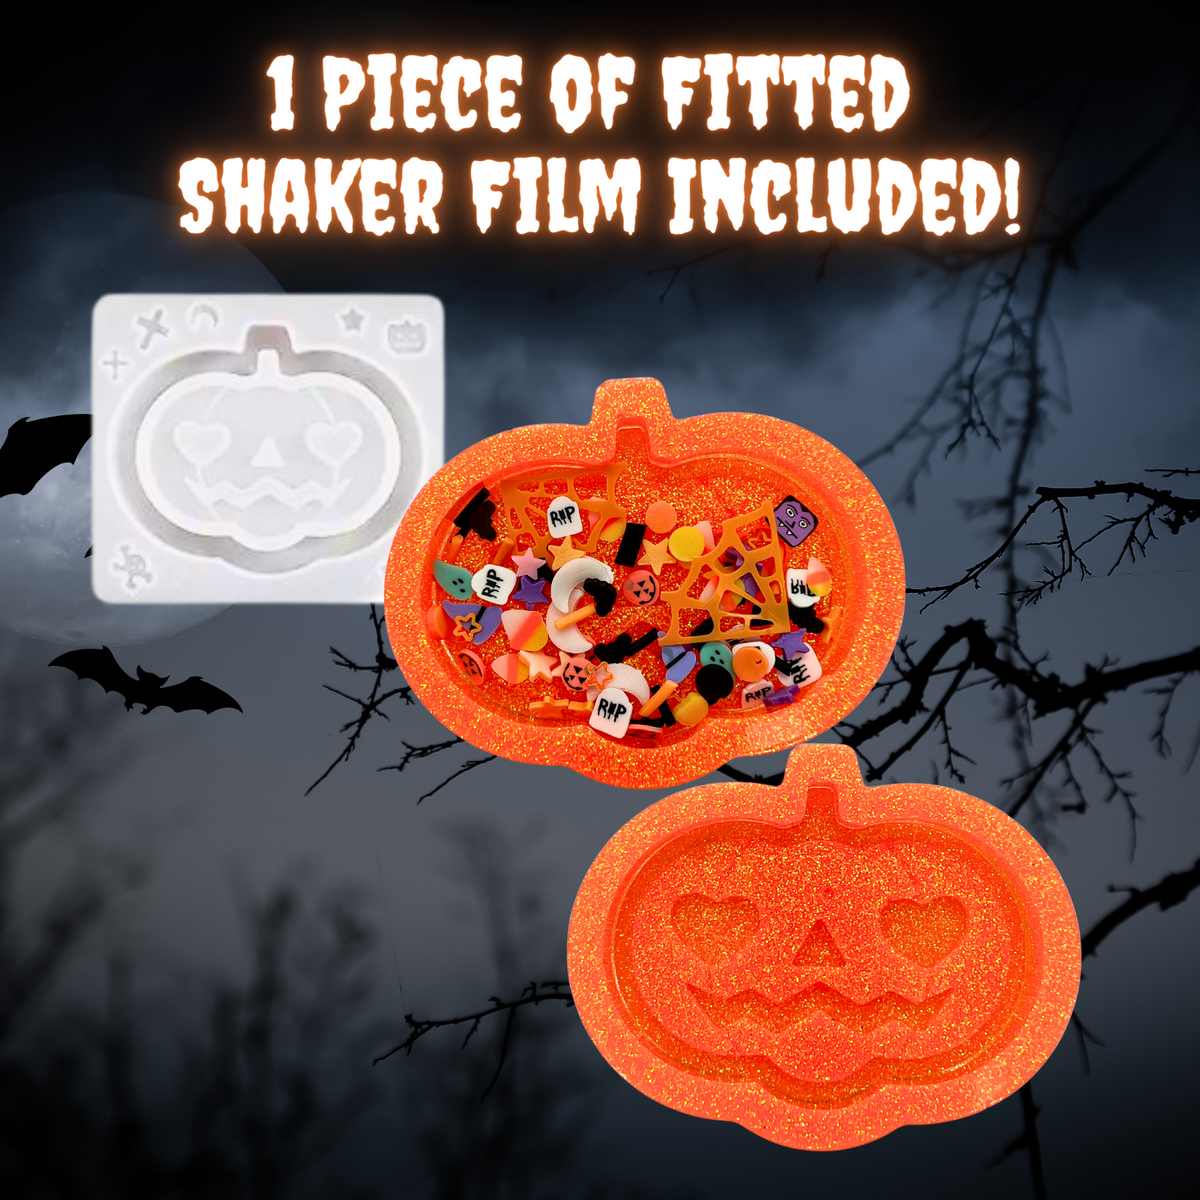 Heart Eyed Pumpkin Halloween Shaker Mold with Fitted Shaker Film for UV and Epoxy Resin Art